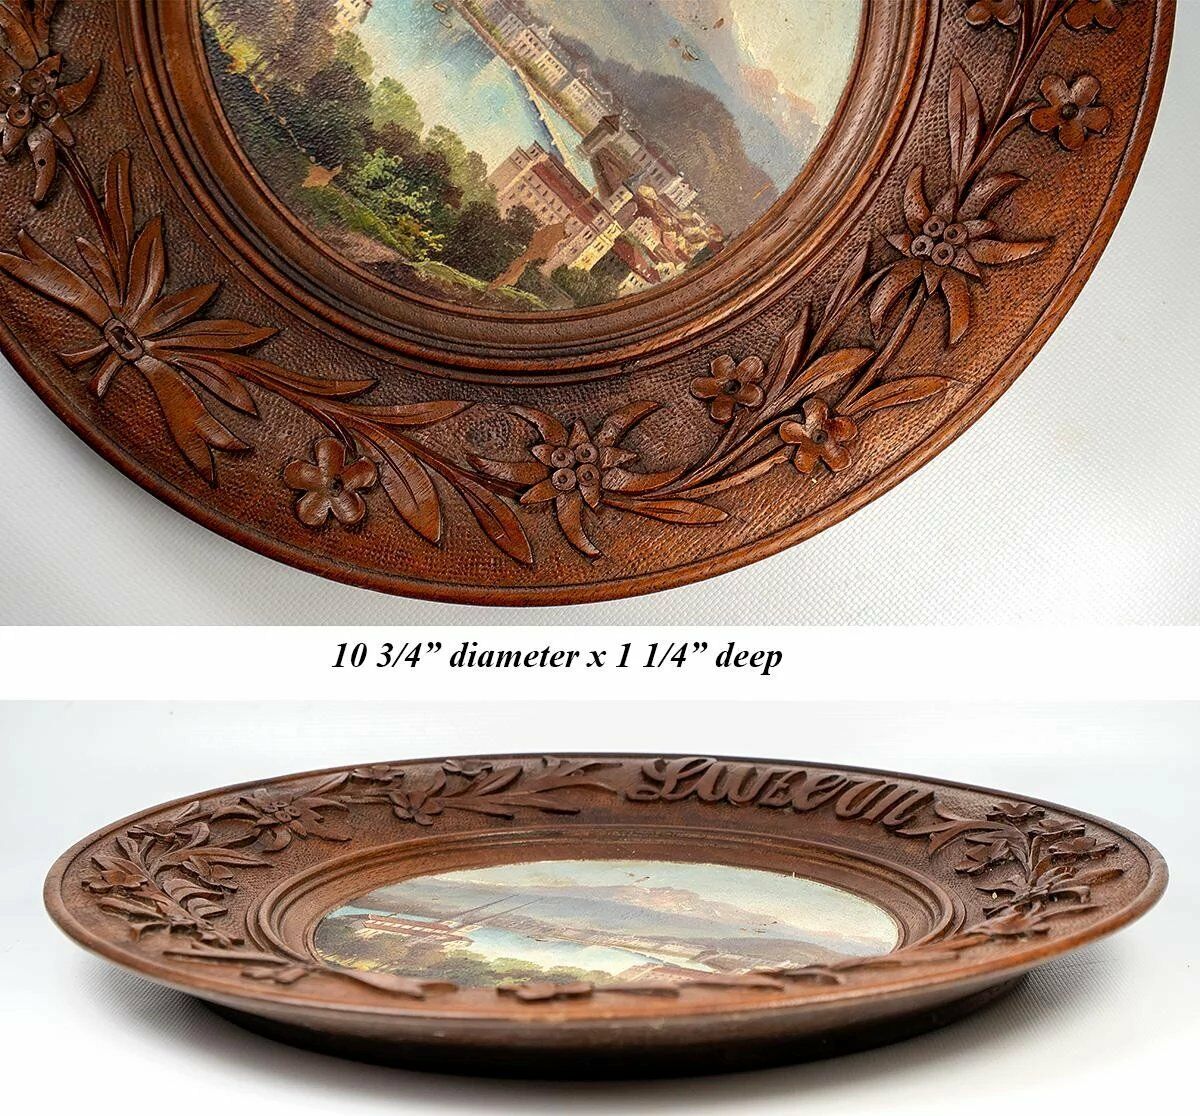 Antique Hand Carved Black Forest Bread Board, Platter, Oil Painting of Lucern